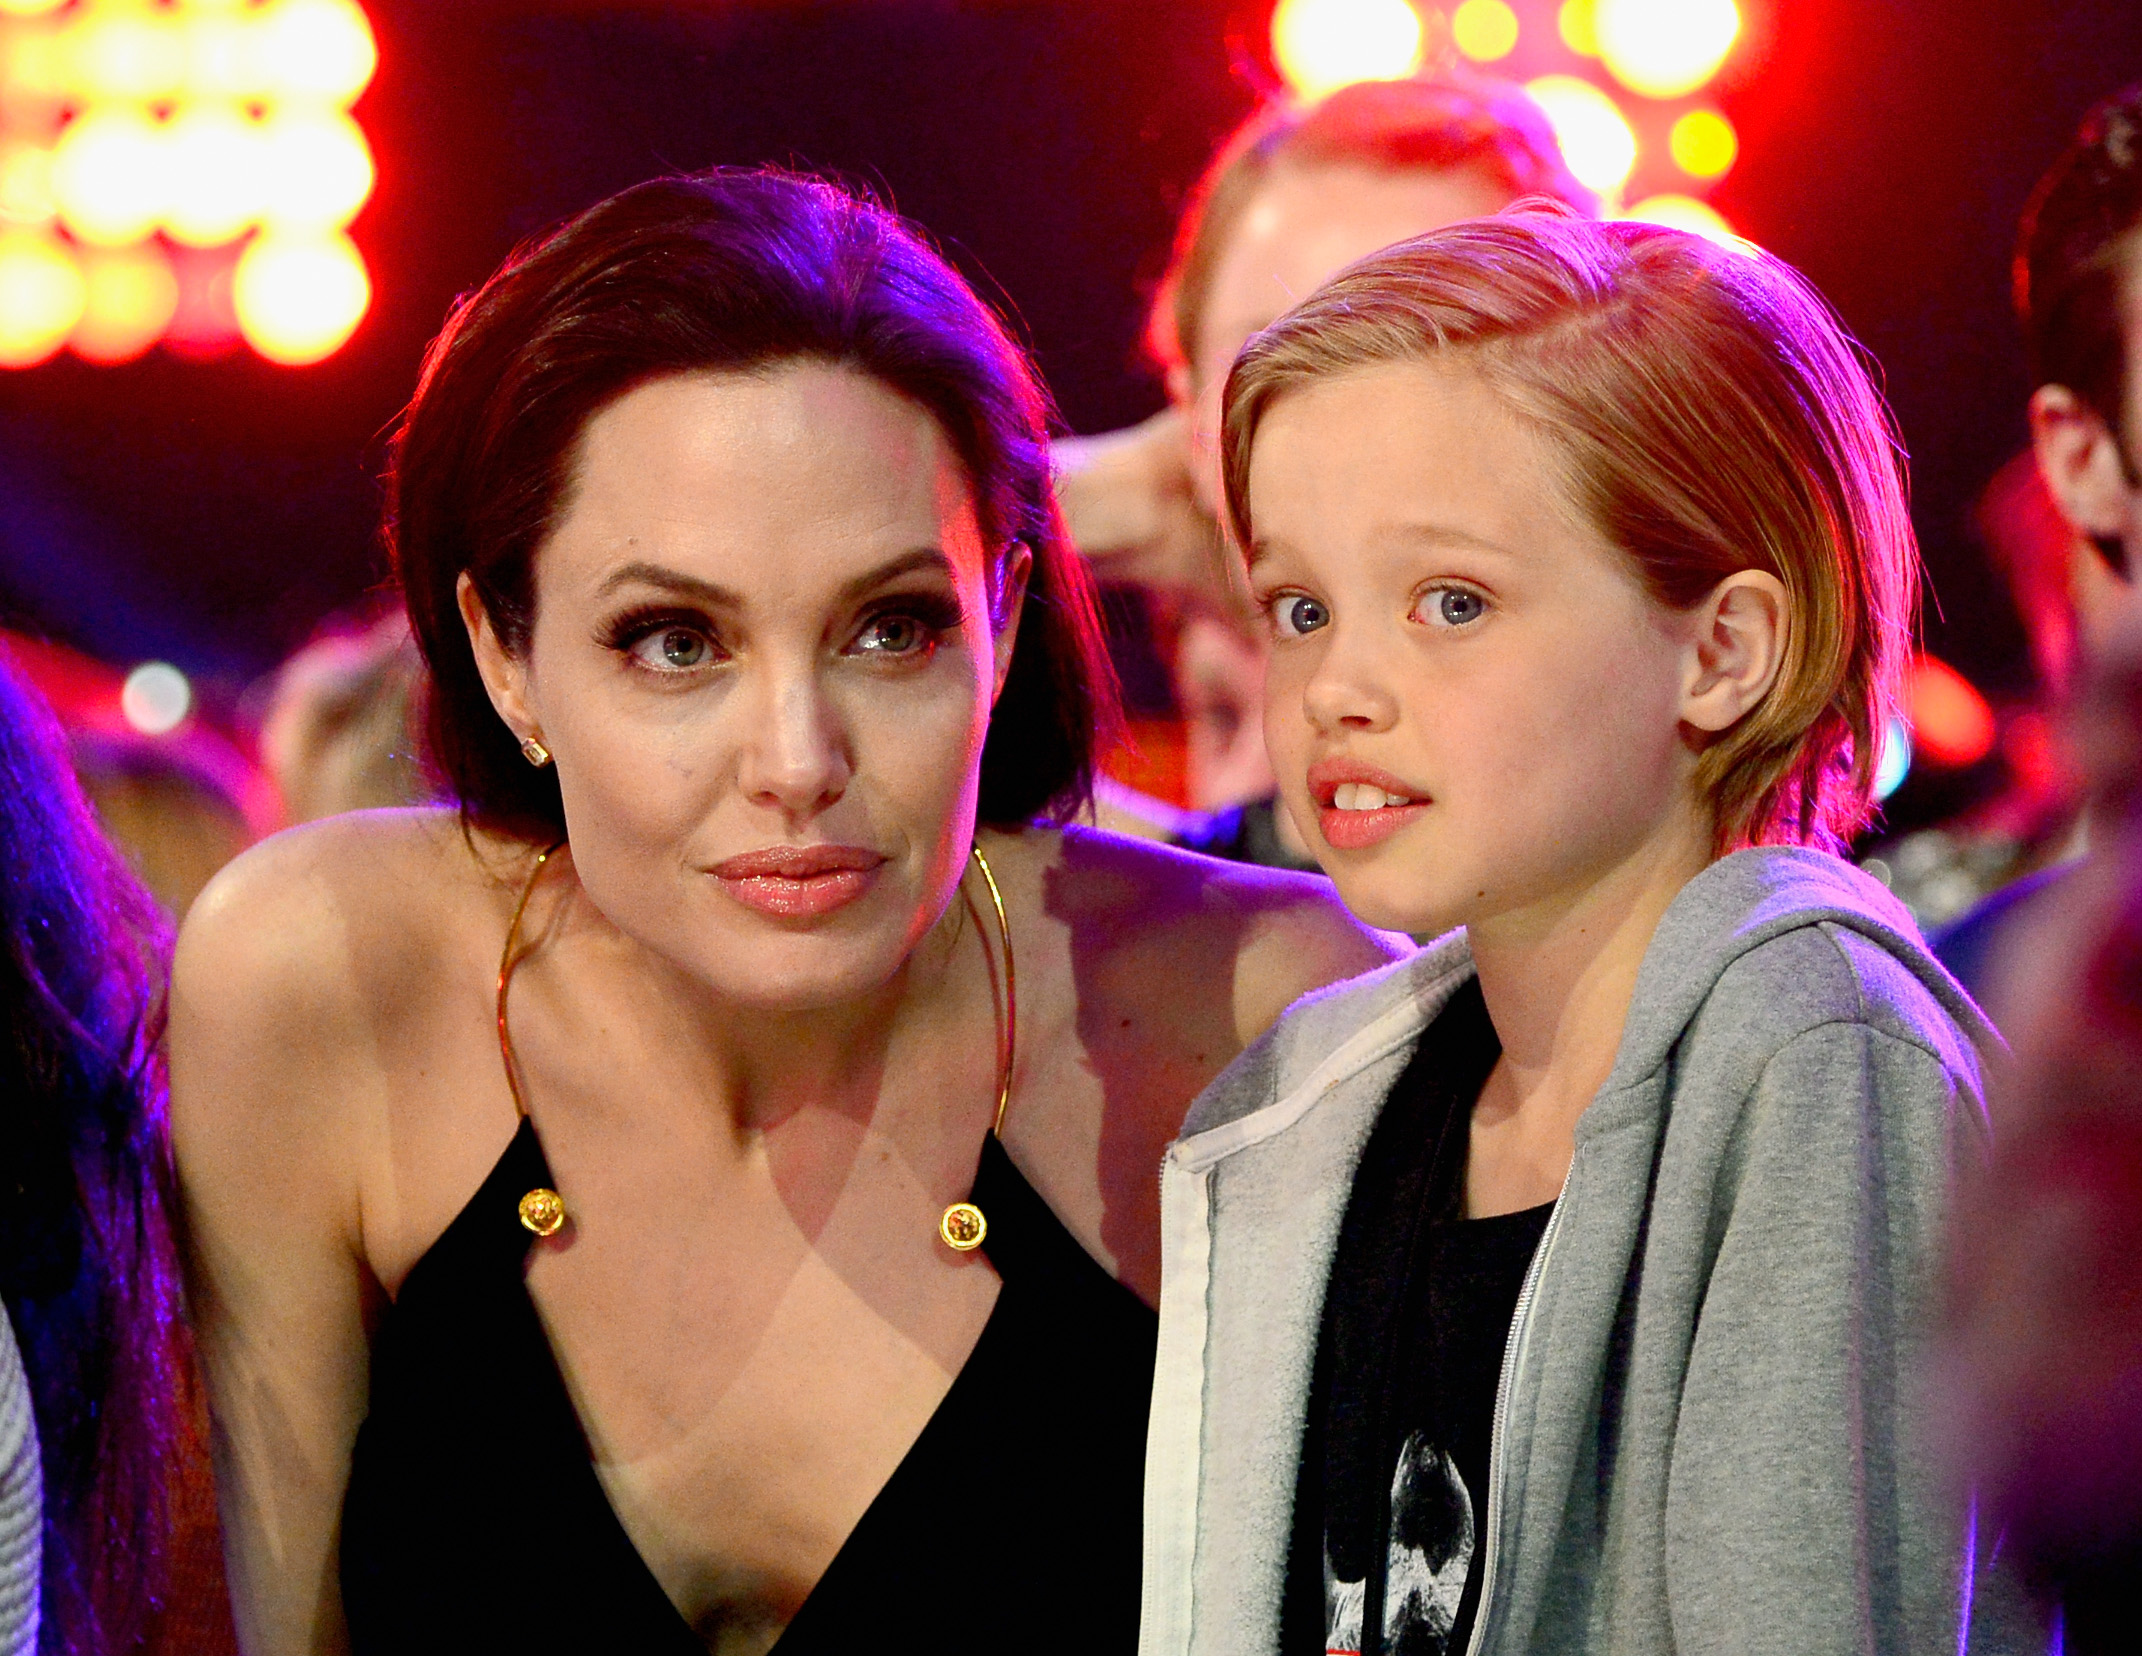 Angelina Jolie and her daughter Shiloh in Los Angeles in 2015. | Source: Getty Images